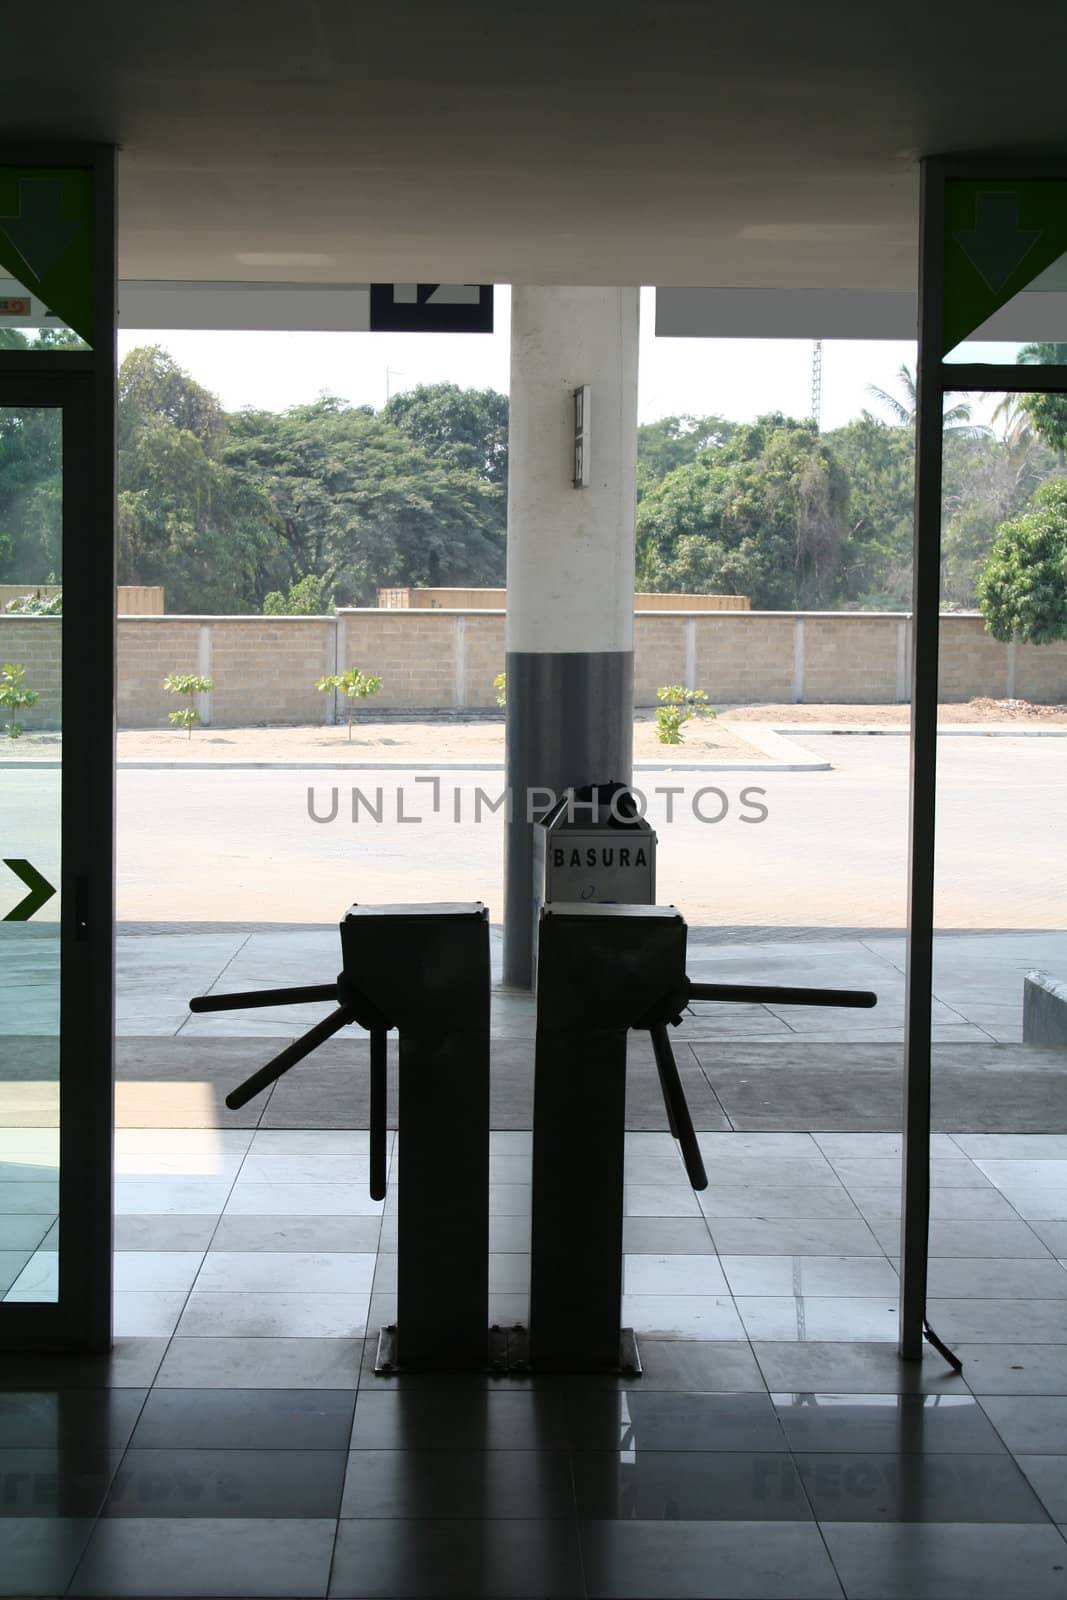 silouette of turnstile at station